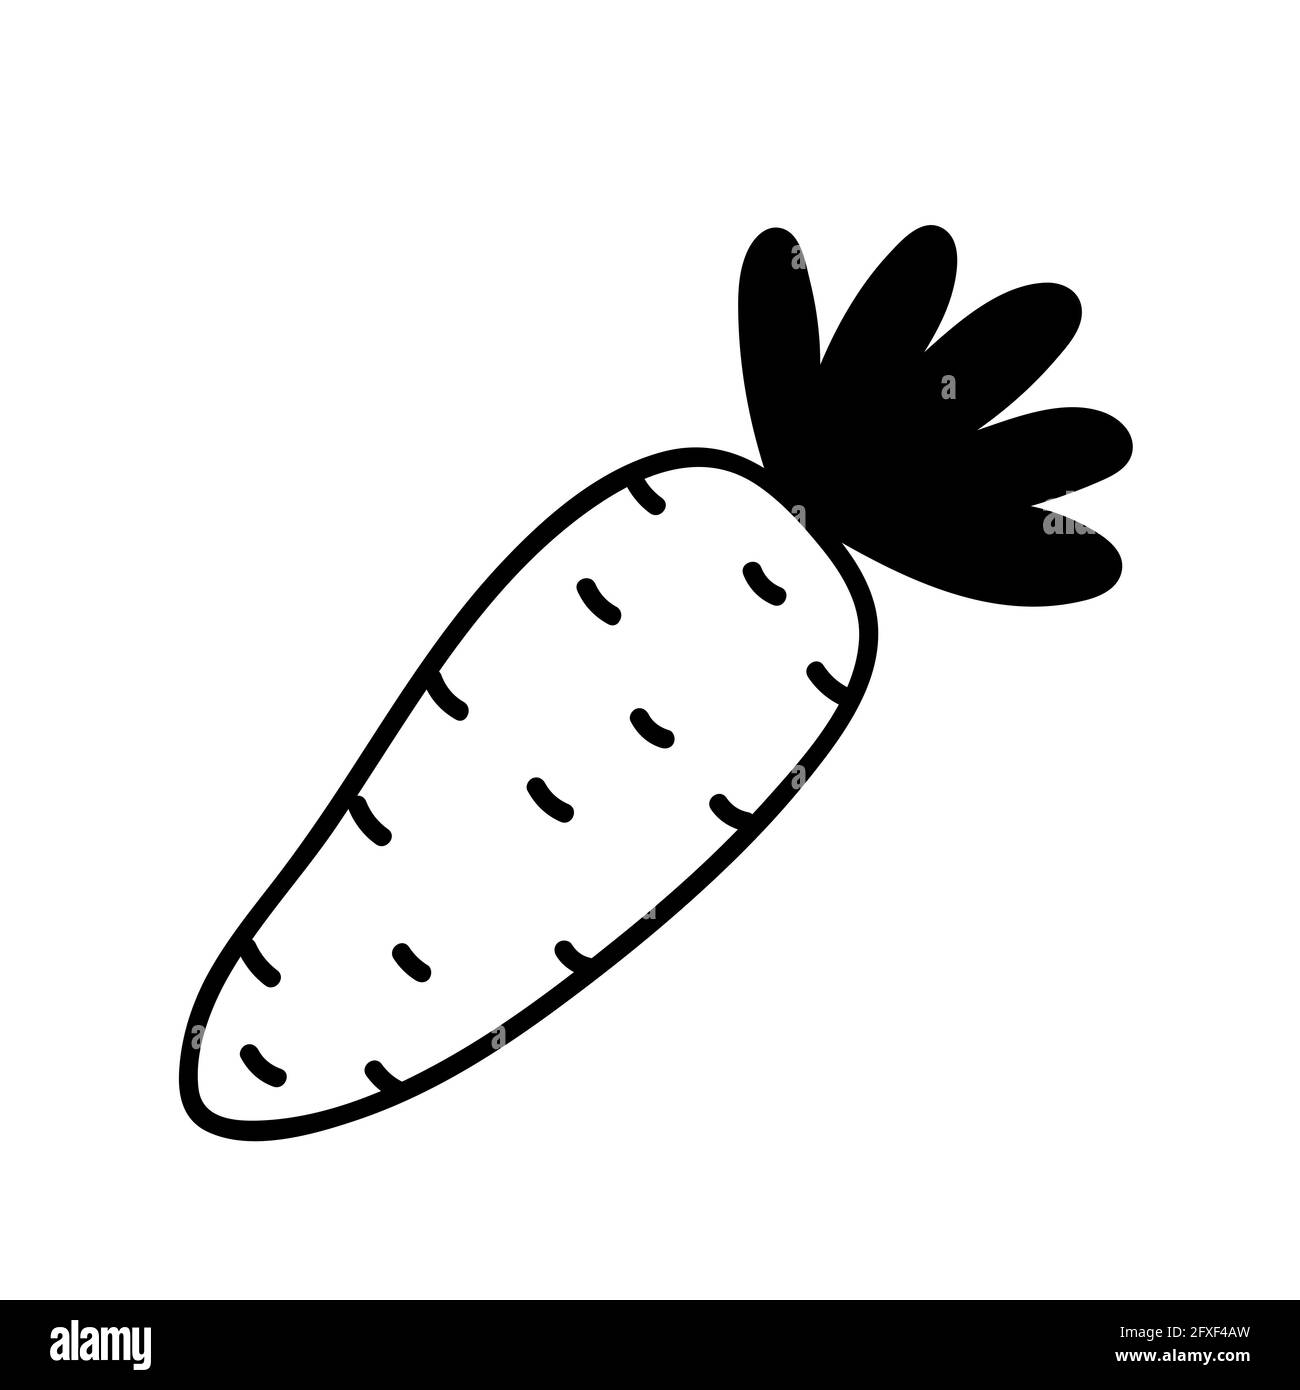 Doodle carrot isolated on white background. Vector hand-drawn illustration. Cute cartoon drawing. Suitable for menu, recipes, decorations, cards Stock Vector